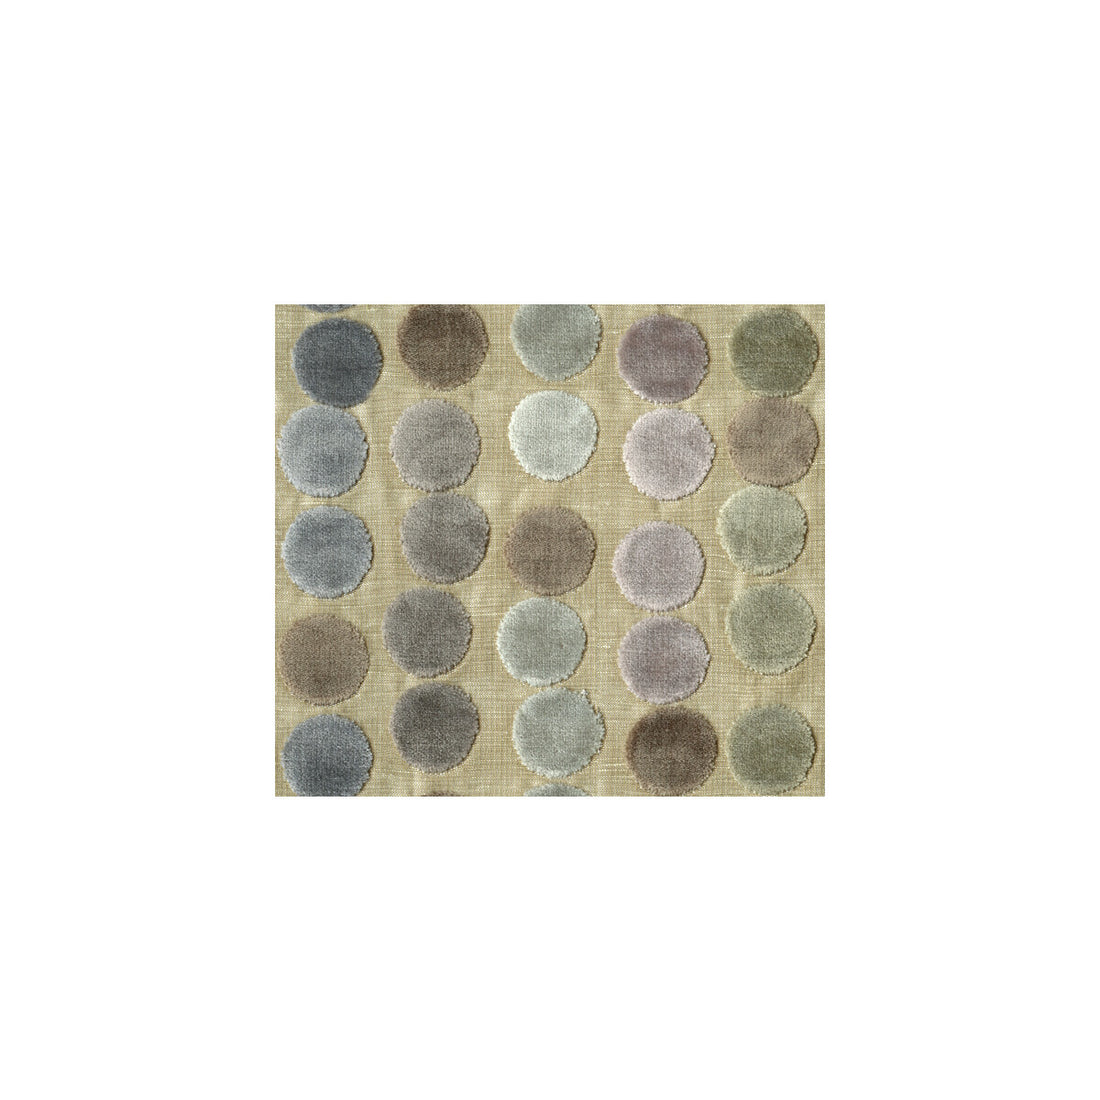 Avery Dots fabric in mauve/taupe color - pattern GWF-3054.711.0 - by Lee Jofa Modern